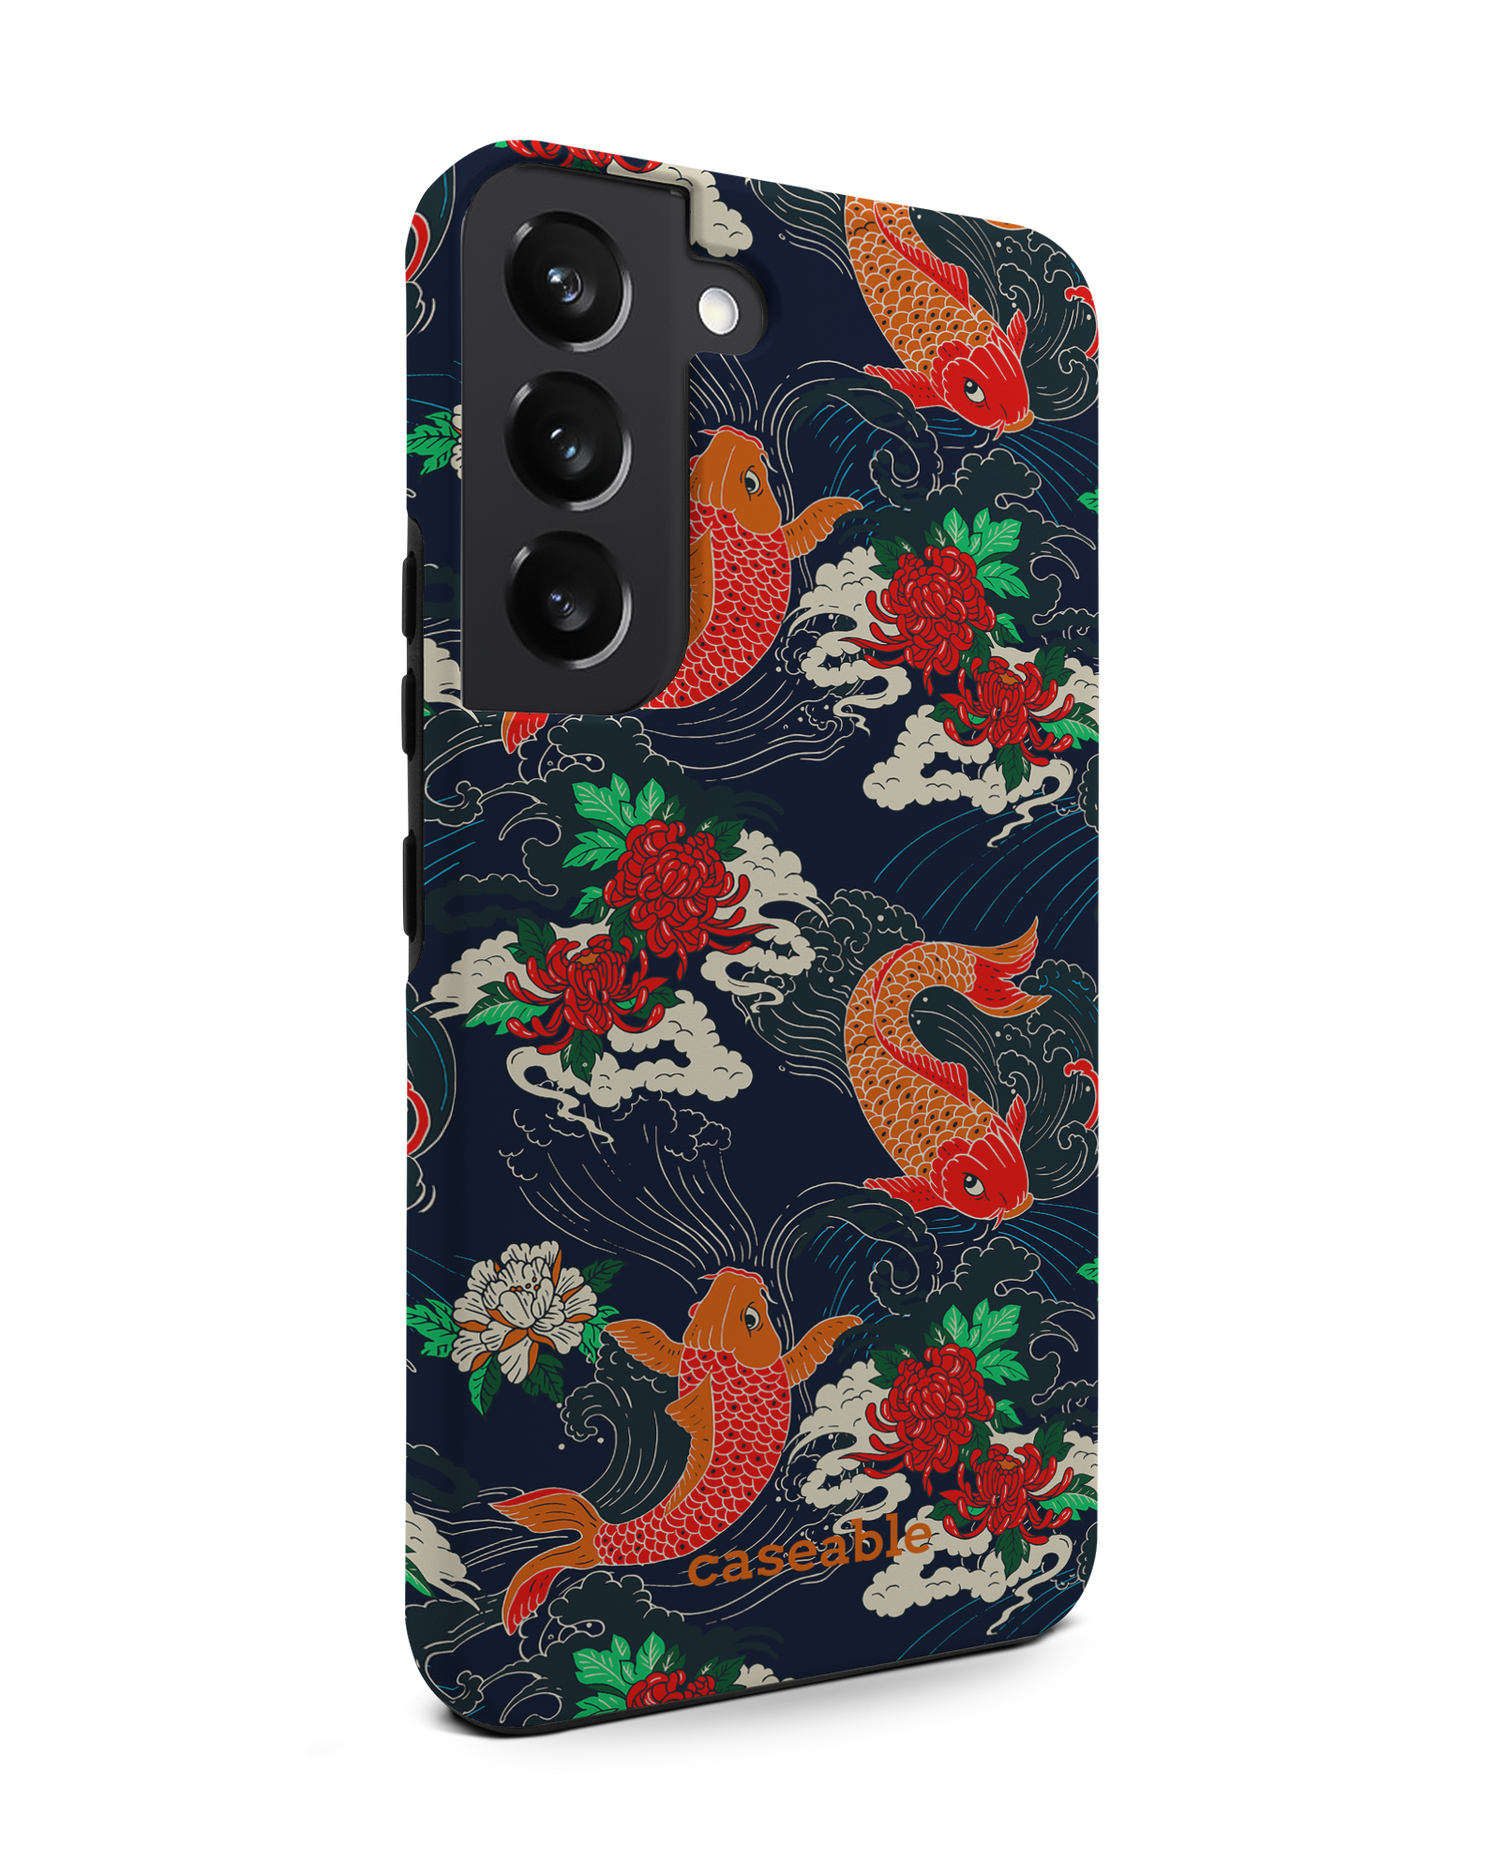 Repeating Koi Premium Phone Case Samsung Galaxy S22 5G: View from the left side